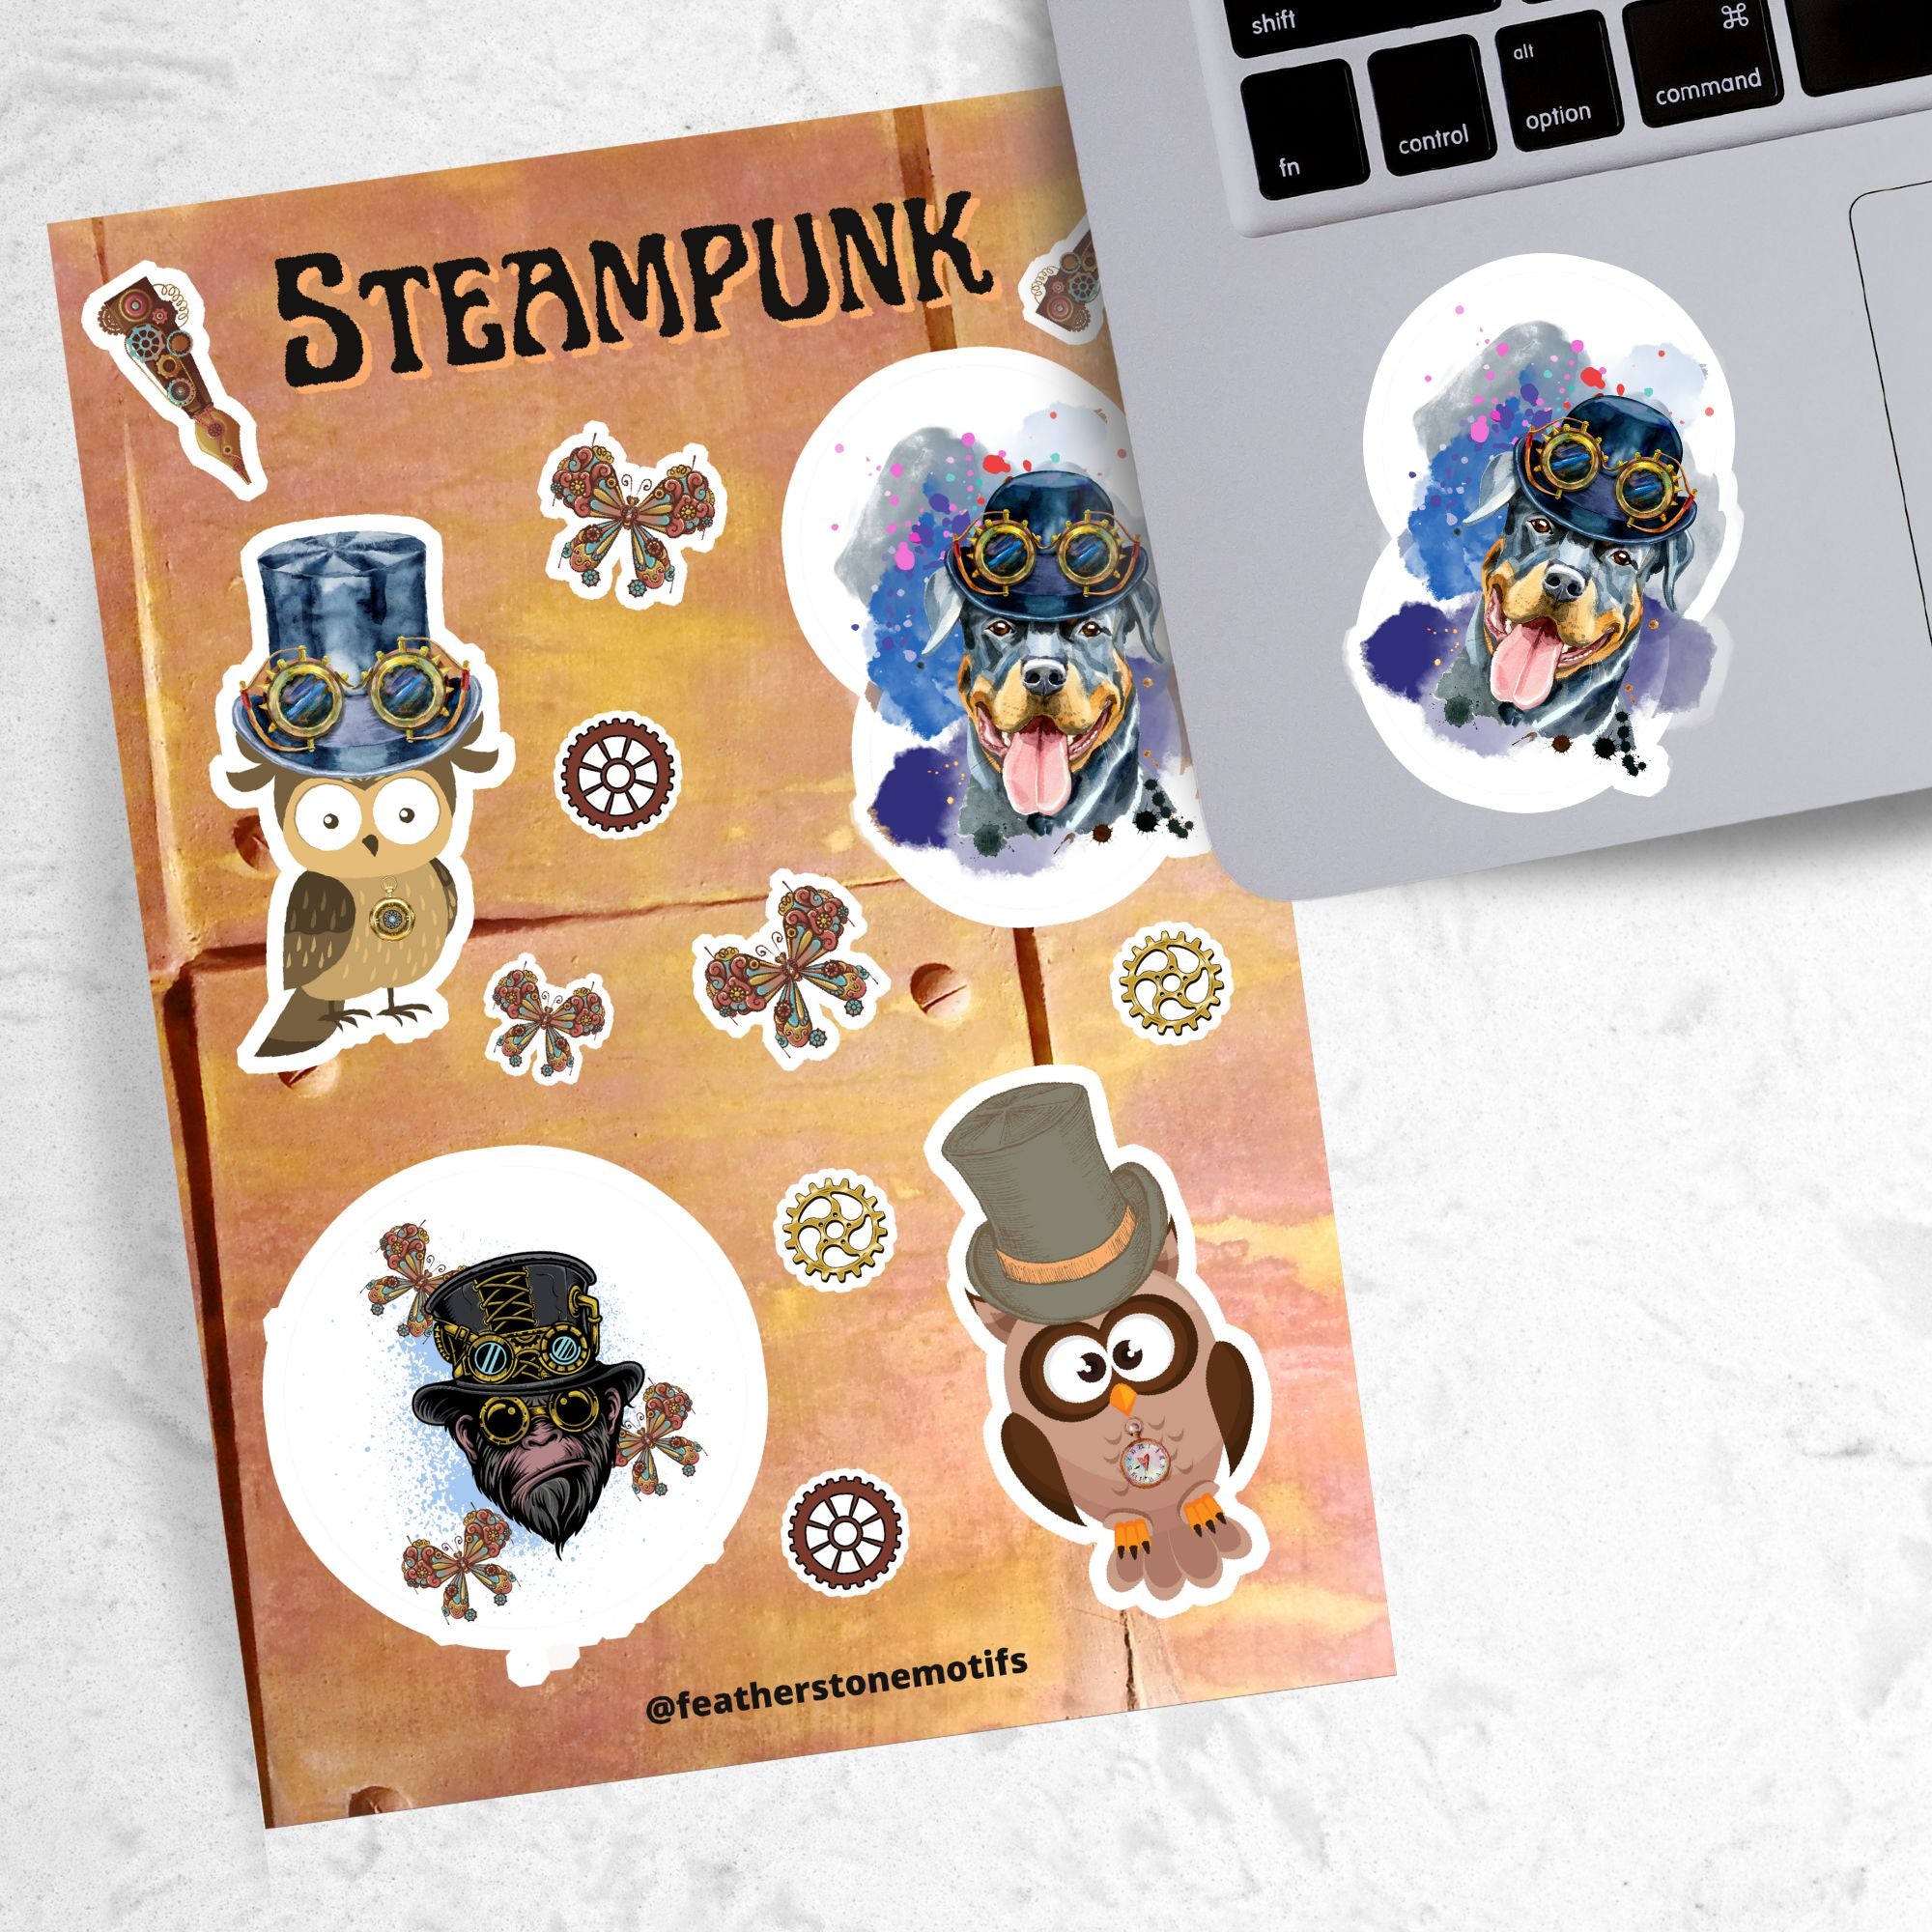 This Steampunk sticker sheet features four large animal stickers: Mr. and Mrs. Owl, Steampunk Monkey, and Steampunk Rotty (Rottweiler) along with smaller miscellaneous gear, butterfly, and pen stickers.  This image shows the sticker sheet next to an open laptop with the Steampunk Rotty sticker applied below the keyboard. The steampunk Rotty sticker is a Rottweiler  wearing a steampunk hat with goggles and a pastel background..